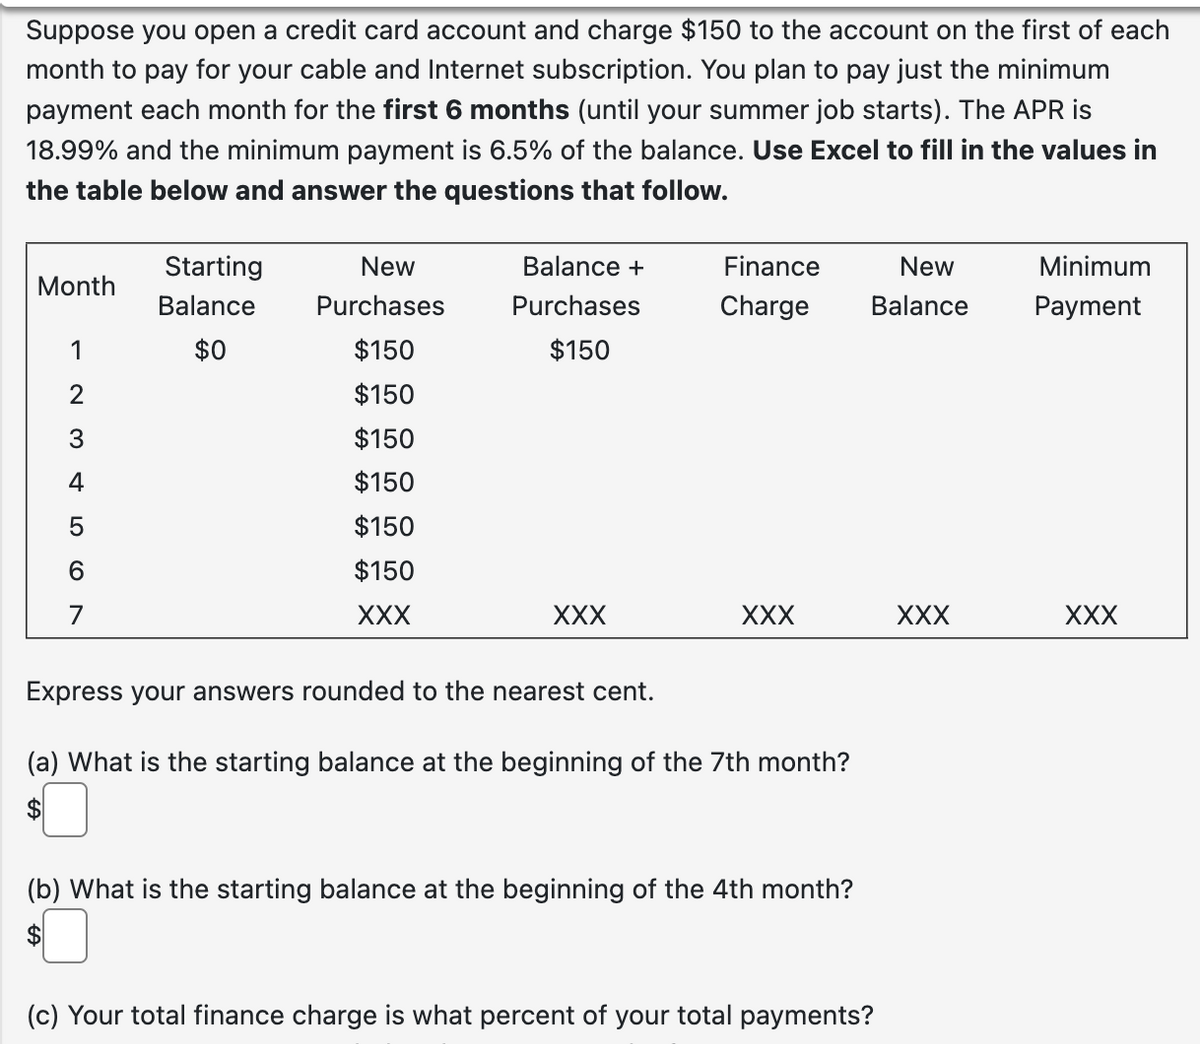 Suppose you open a credit card account and charge $150 to the account on the first of each
month to pay for your cable and Internet subscription. You plan to pay just the minimum
payment each month for the first 6 months (until your summer job starts). The APR is
18.99% and the minimum payment is 6.5% of the balance. Use Excel to fill in the values in
the table below and answer the questions that follow.
Month
— 23 5 6
1
4
7
Starting
Balance
$0
New
Purchases
$150
$150
$150
$150
$150
$150
XXX
Balance +
Purchases
$150
XXX
Finance
New
Charge Balance
XXX
Express your answers rounded to the nearest cent.
(a) What is the starting balance at the beginning of the 7th month?
$
(b) What is the starting balance at the beginning of the 4th month?
$
(c) Your total finance charge is what percent of your total payments?
XXX
Minimum
Payment
XXX